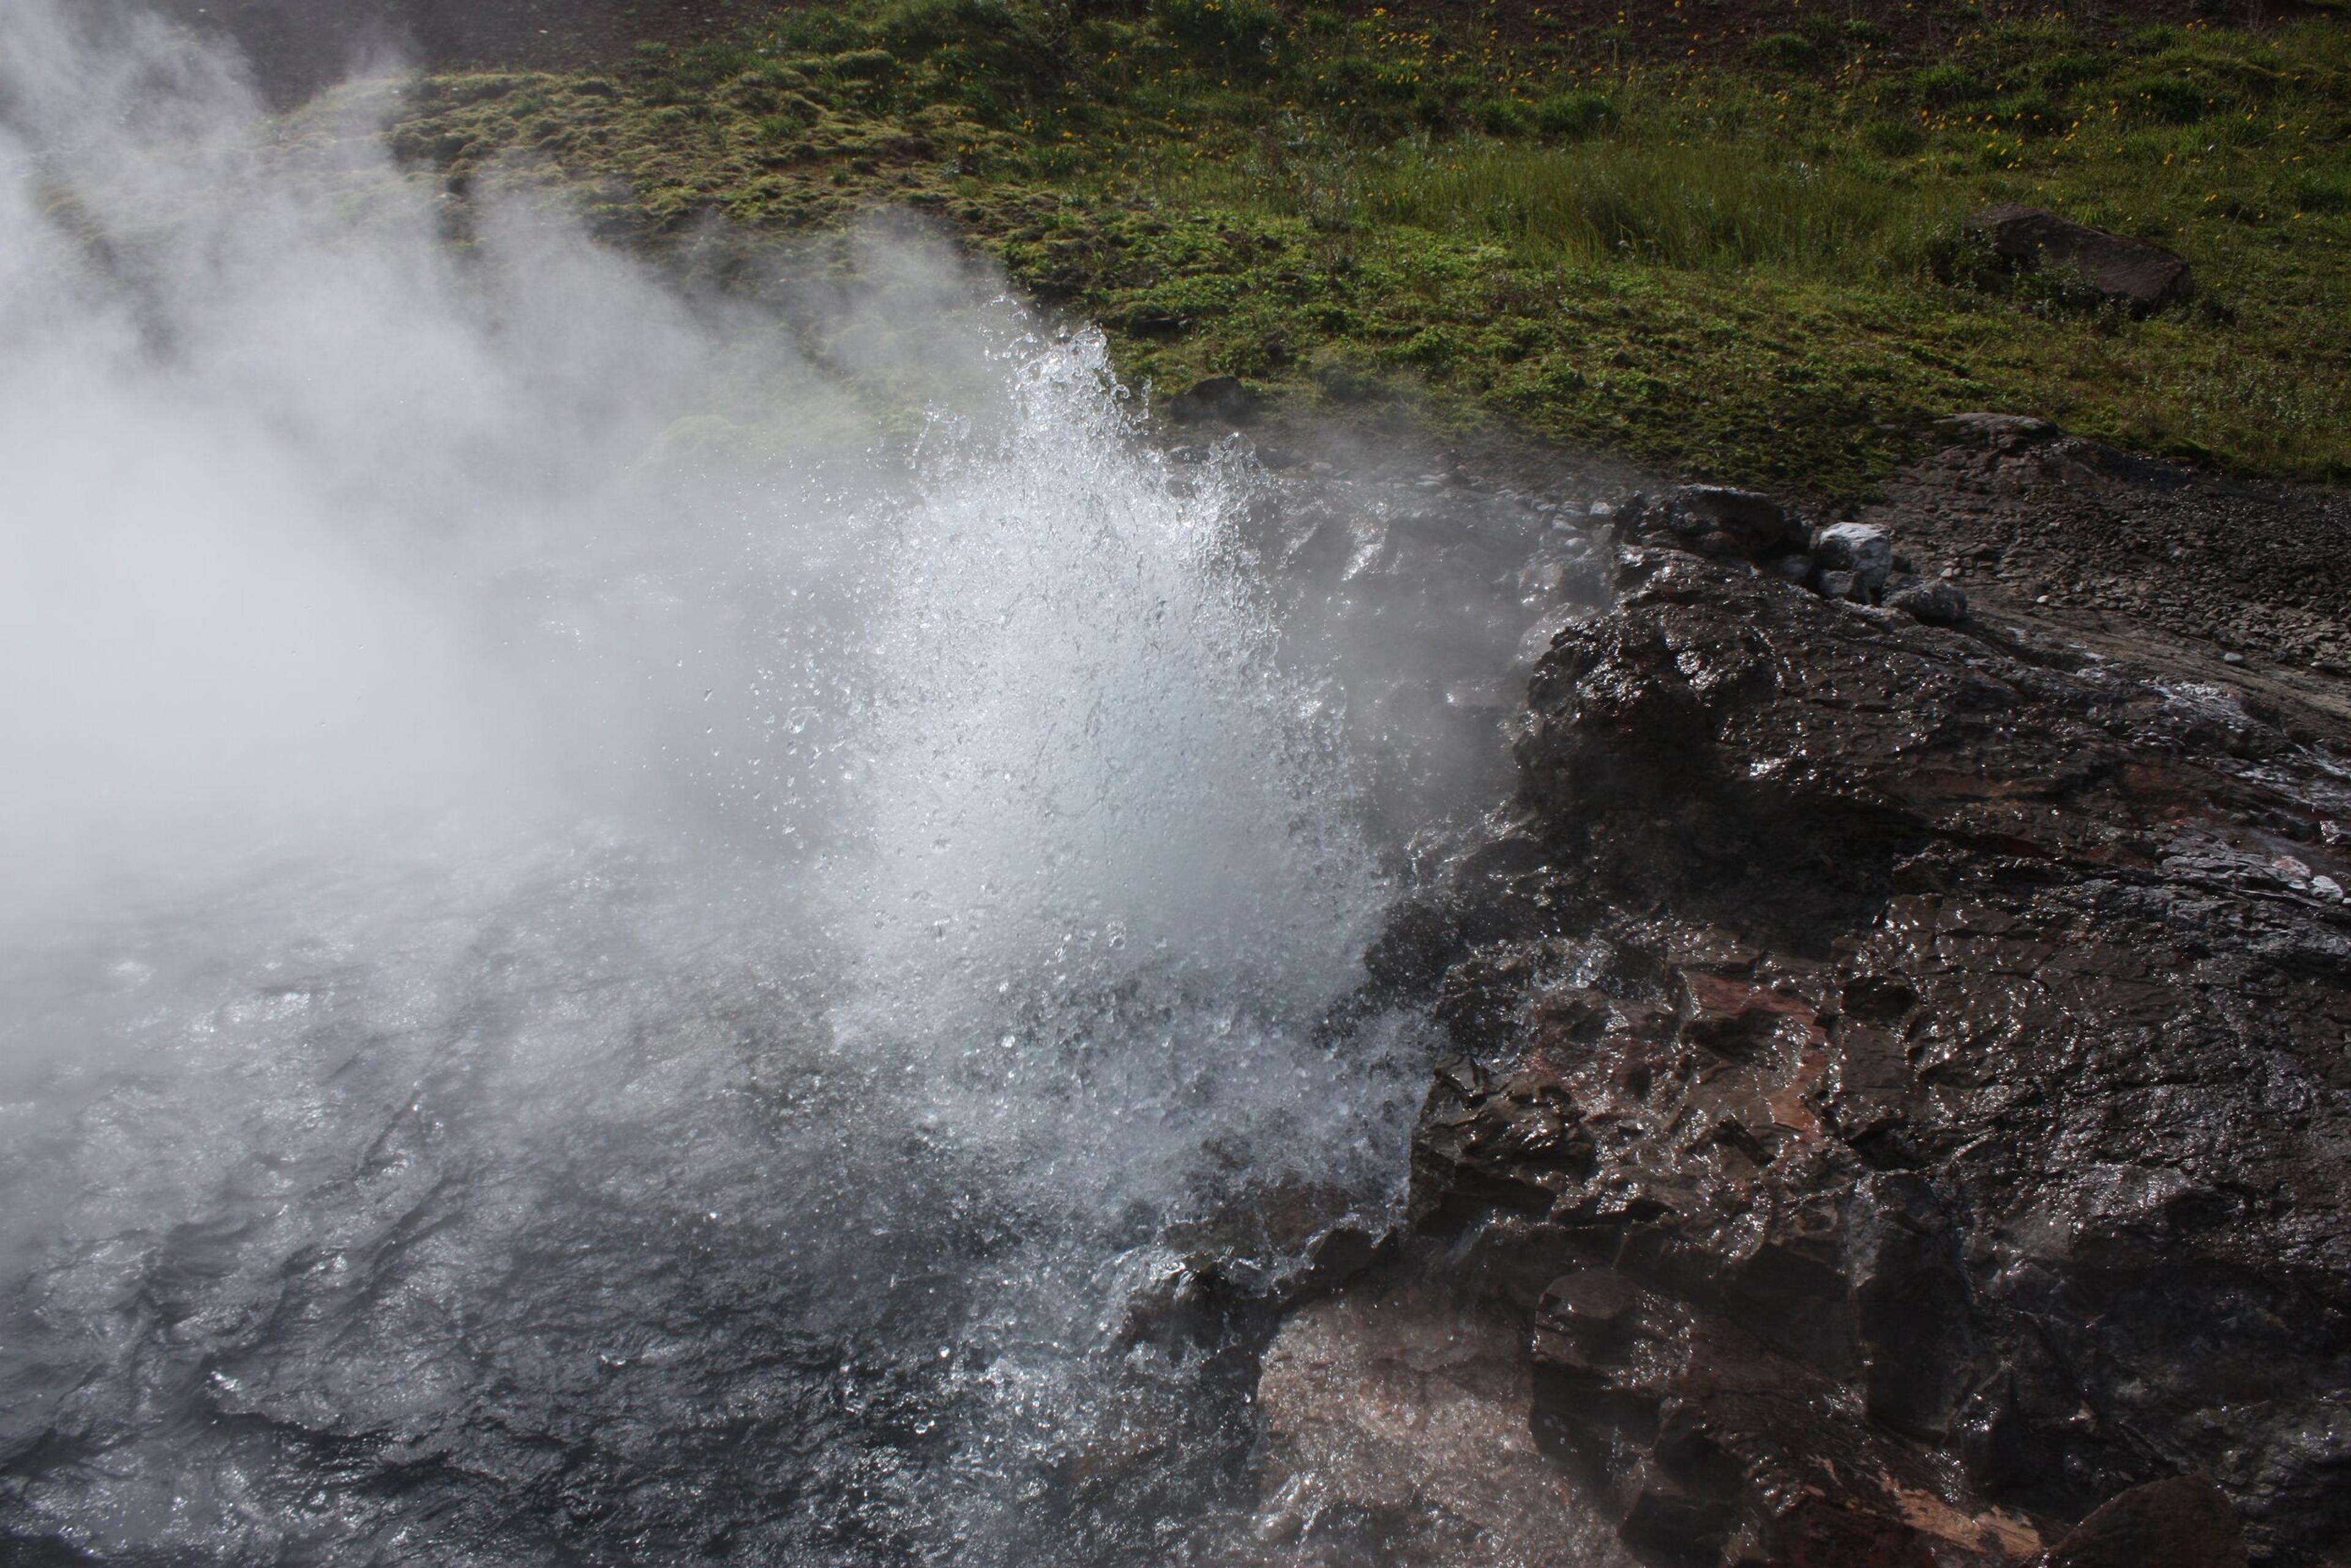 Close-up picture of a hot spring at Deildartunguhver in Iceland.